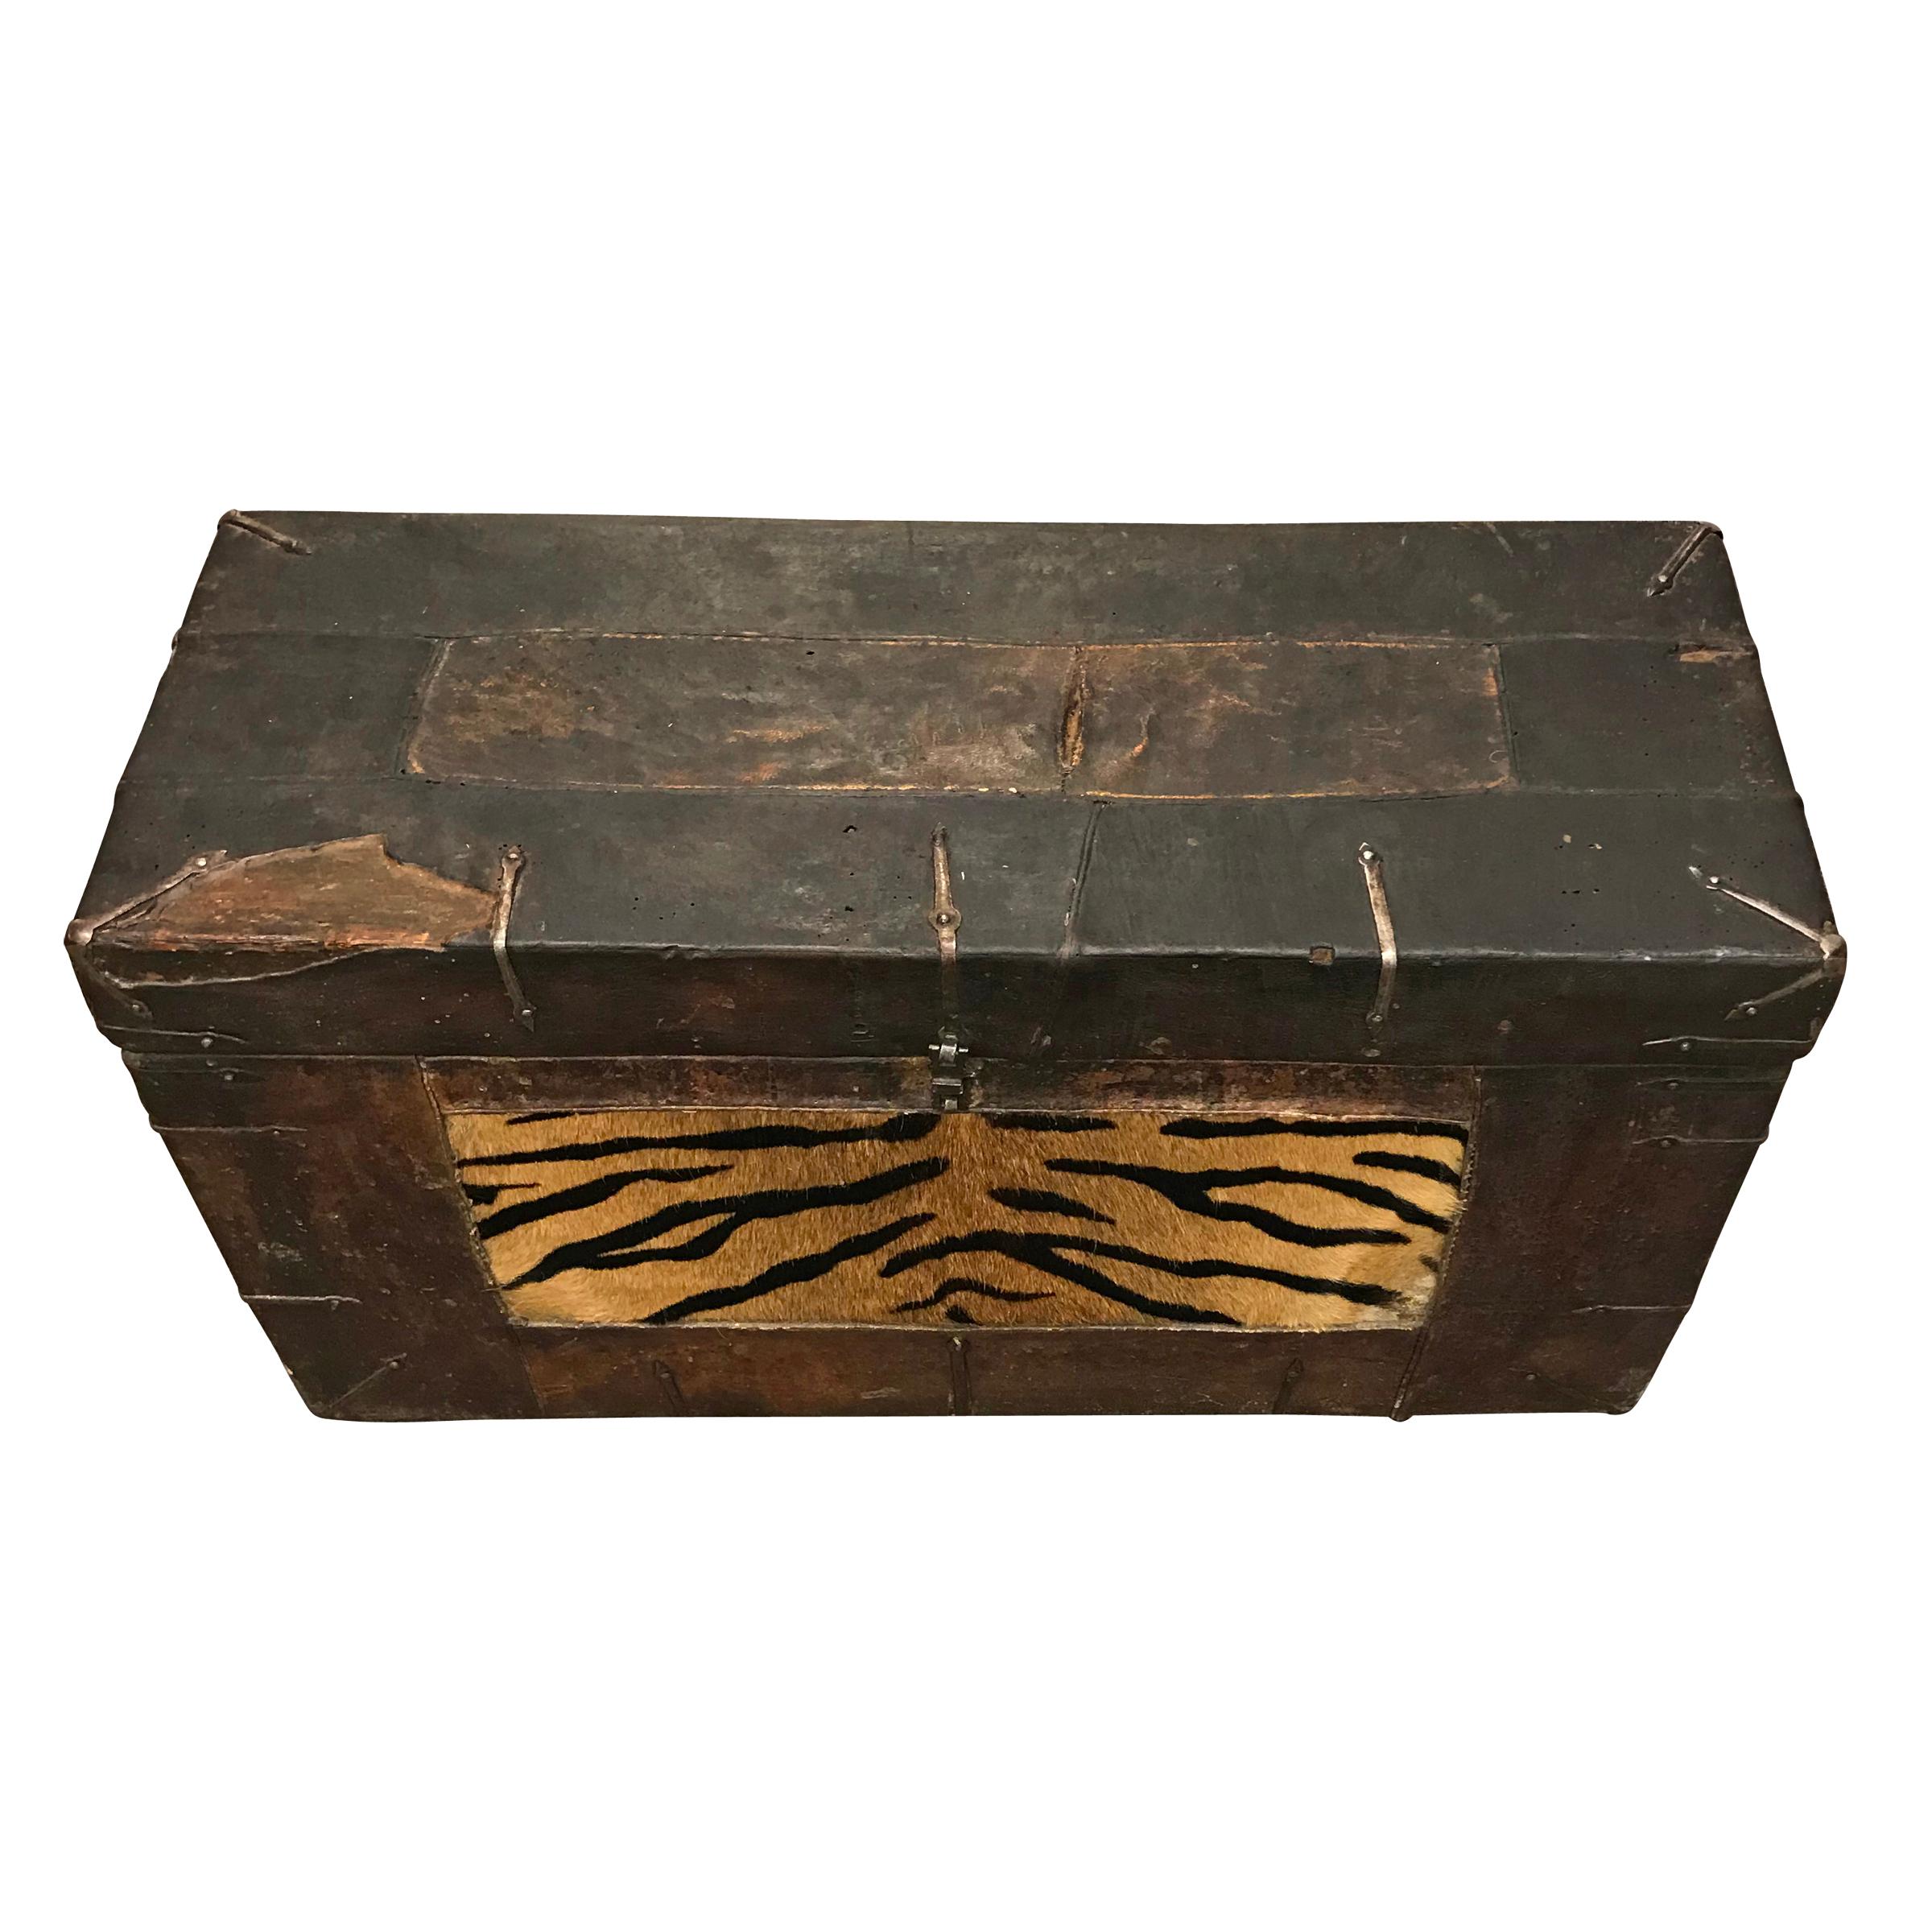 A gorgeous 19th century Tibetan wood trunk, covered in leather, with a cowhide panel painted to mimic tiger fur. In Tibet, tigers symbolize unconditional confidence, disciplined awareness, kindness and modesty; all good things!